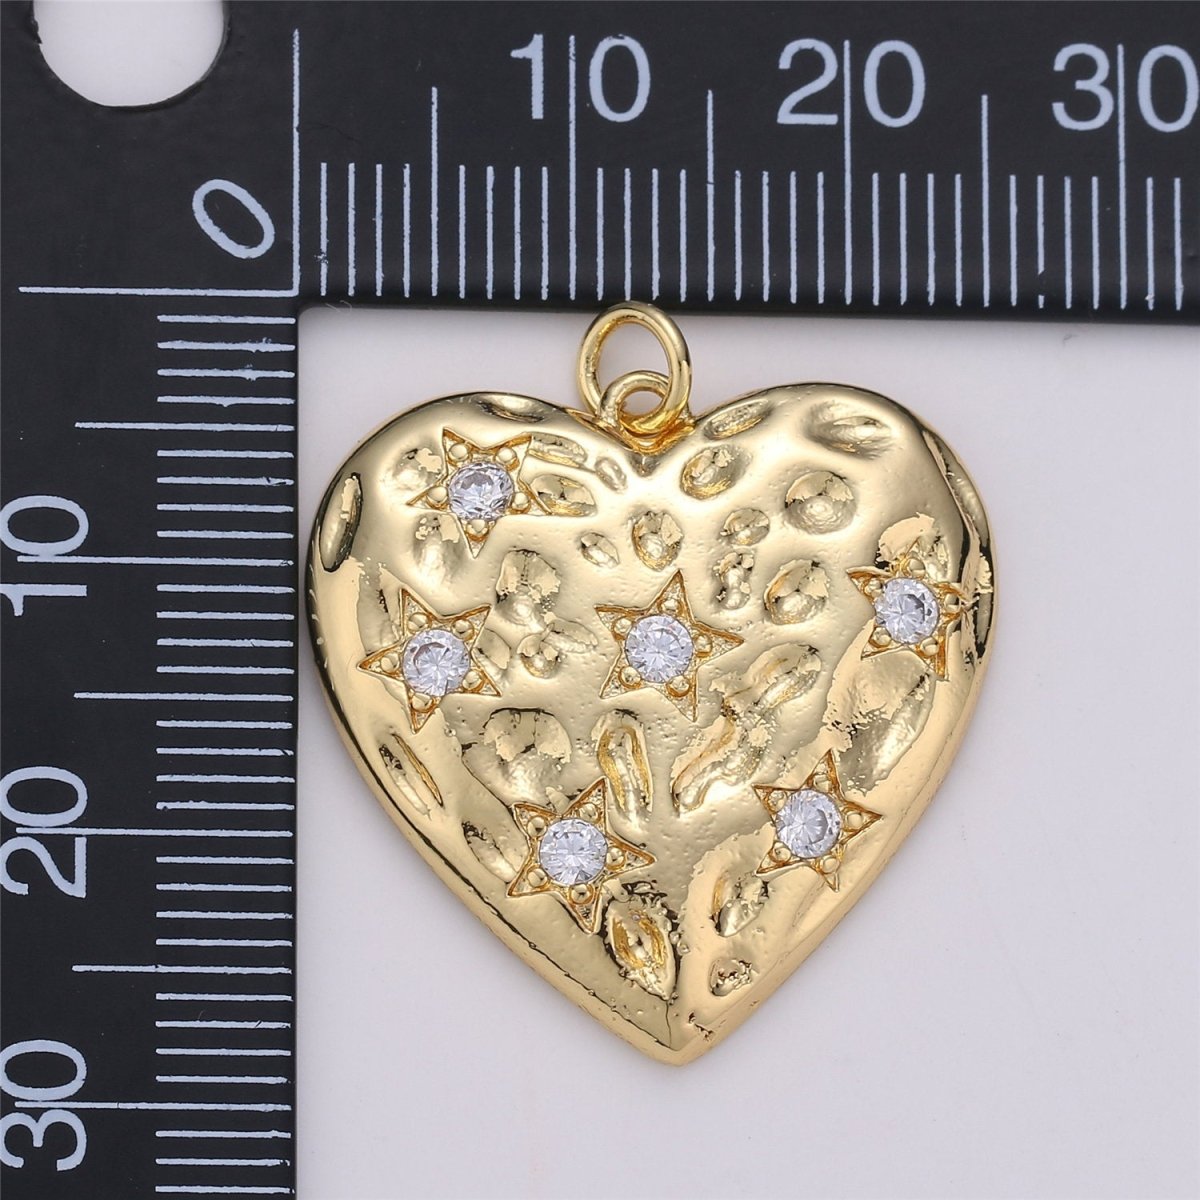 24K Gold Filled Rustic Textured Heart Charm with Micro Pave Little Star Shape Cubic Zirconia CZ Stone for Love Necklace or Bracelet C-864 - DLUXCA